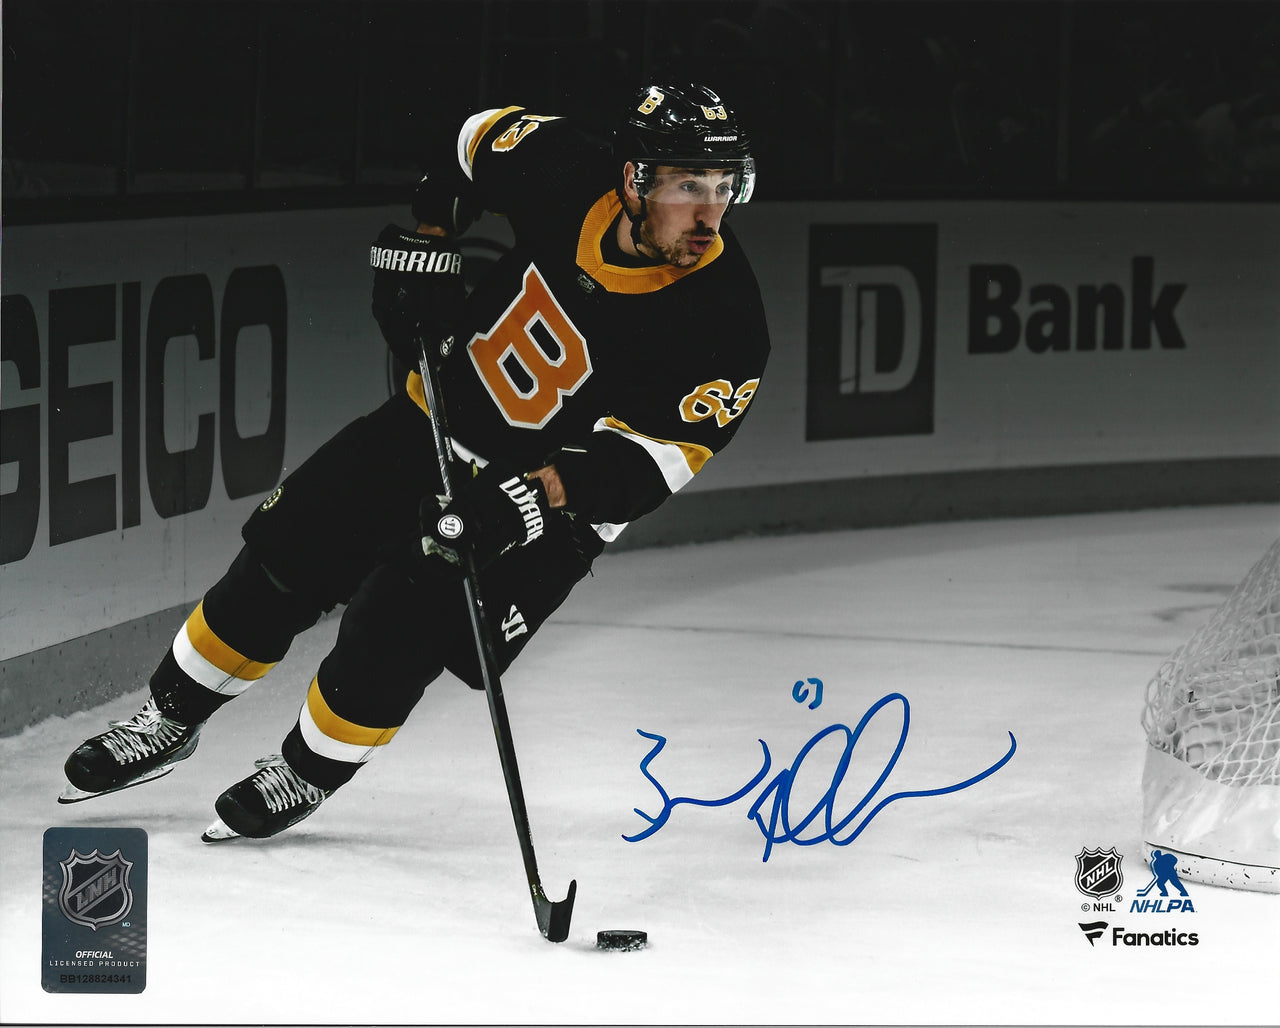 Brad Marchand 2011 Stanley Cup Boston Bruins Autographed Hockey Photo